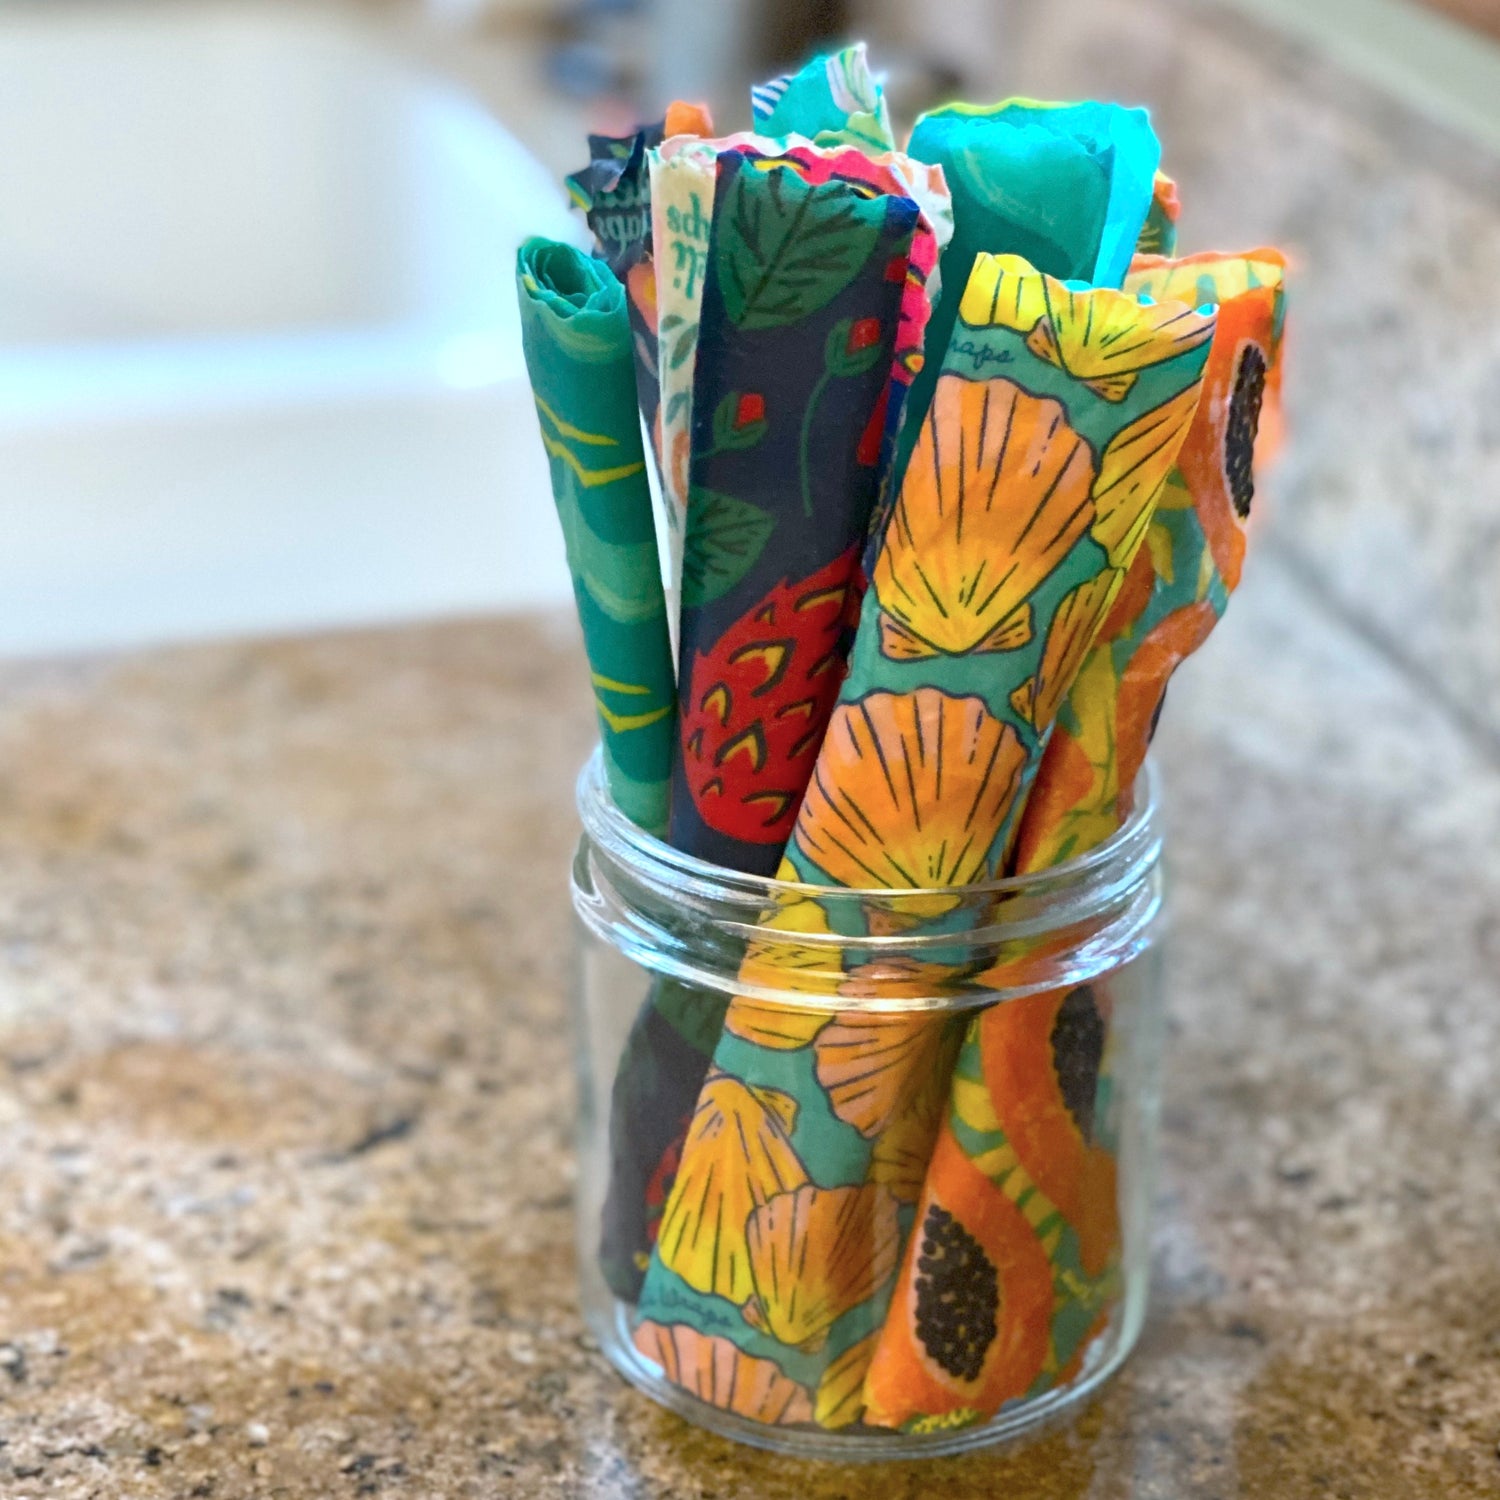 How to Properly Care for Beeswax Wraps